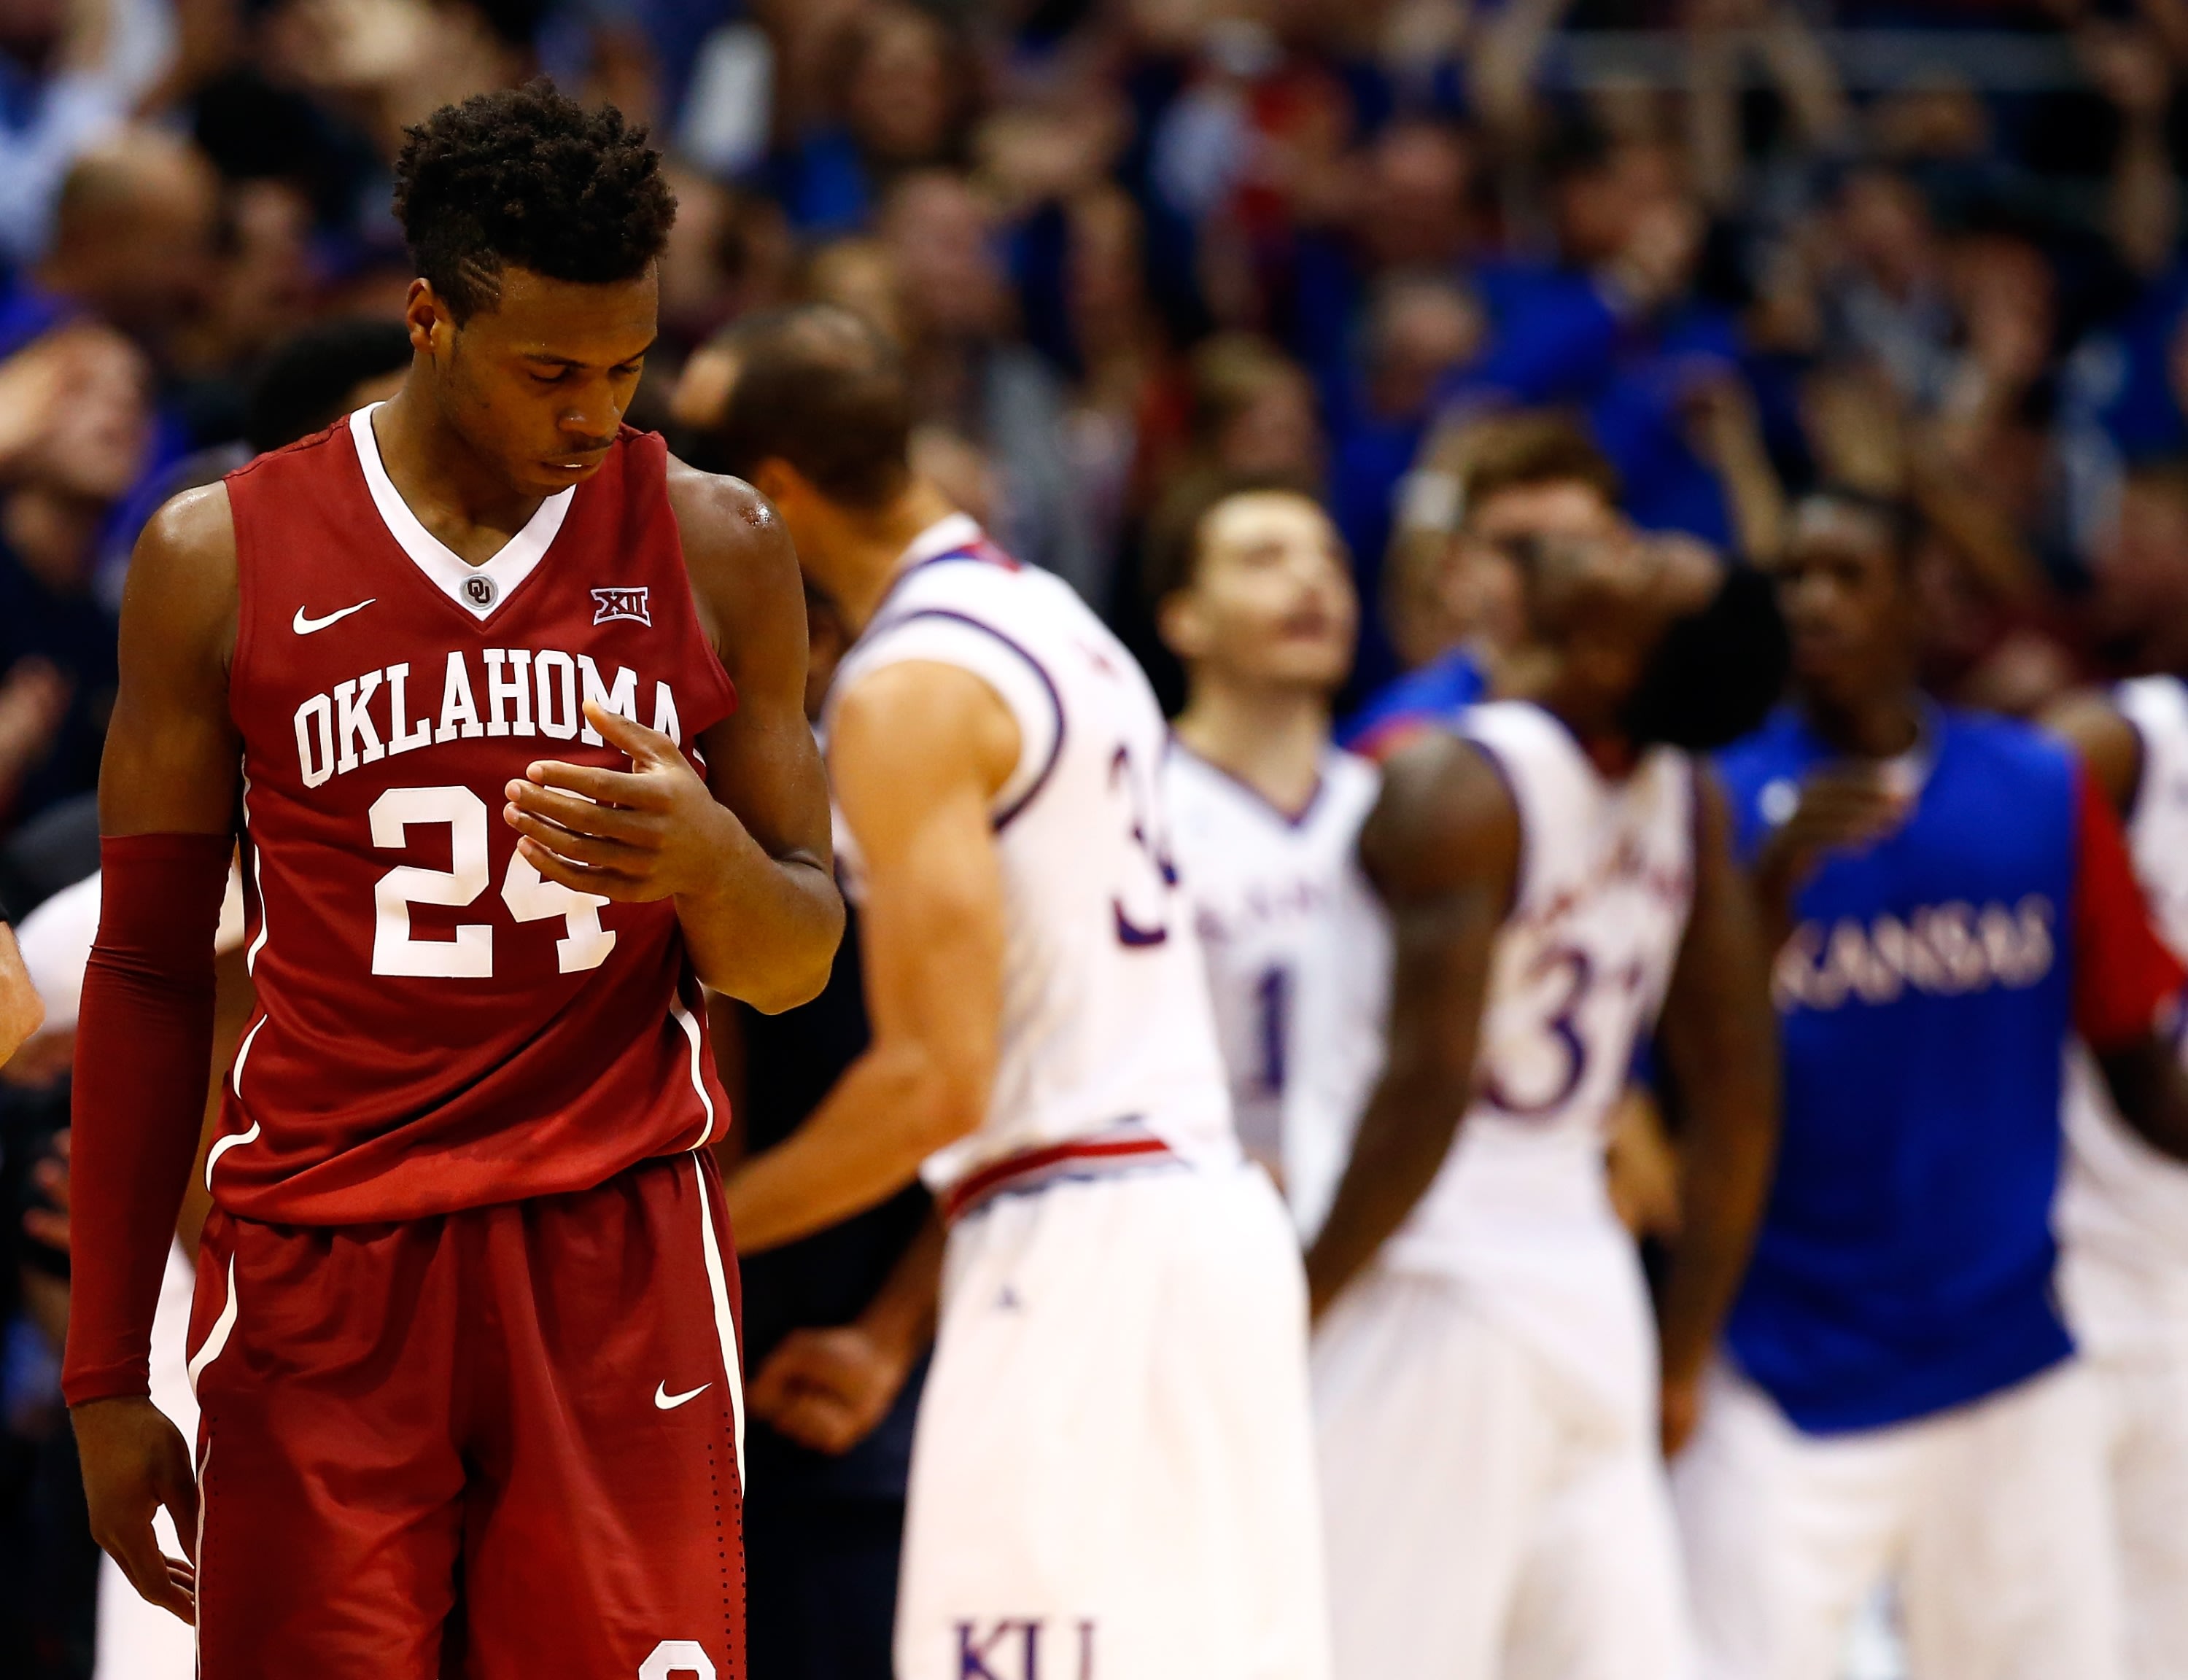 Buddy Hield reacts as Jayhawks celebrate during Oklahoma's loss. (Getty)